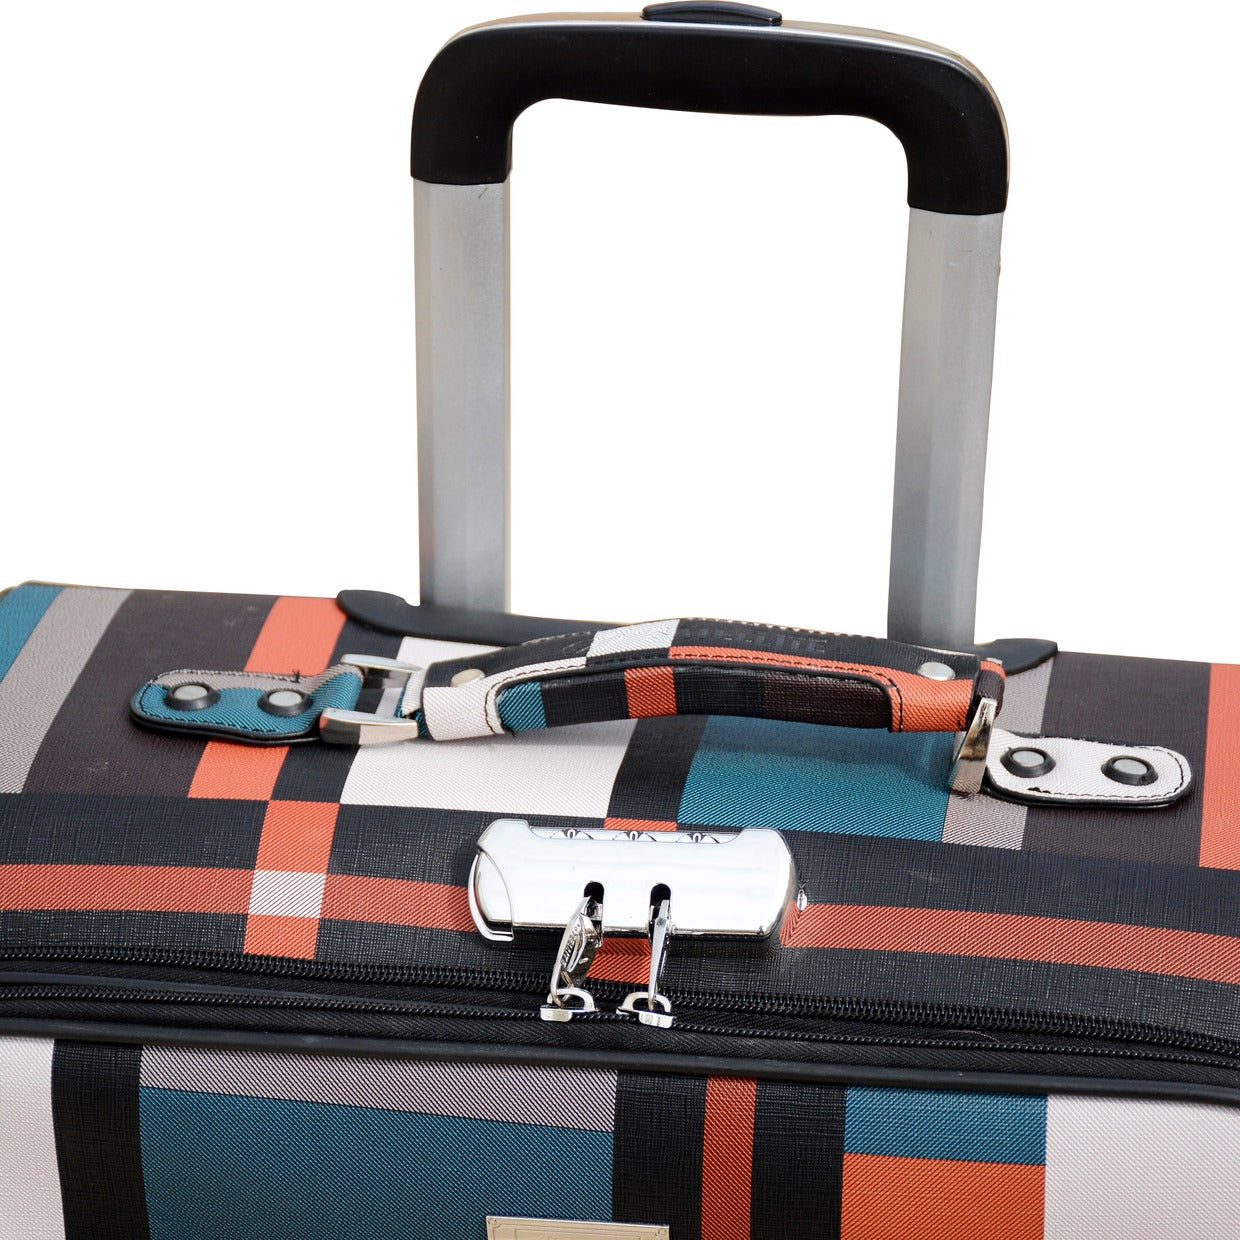 32" PU Check Type Luggage Lightweight Soft Material Trolley Bag with Spinner Wheel